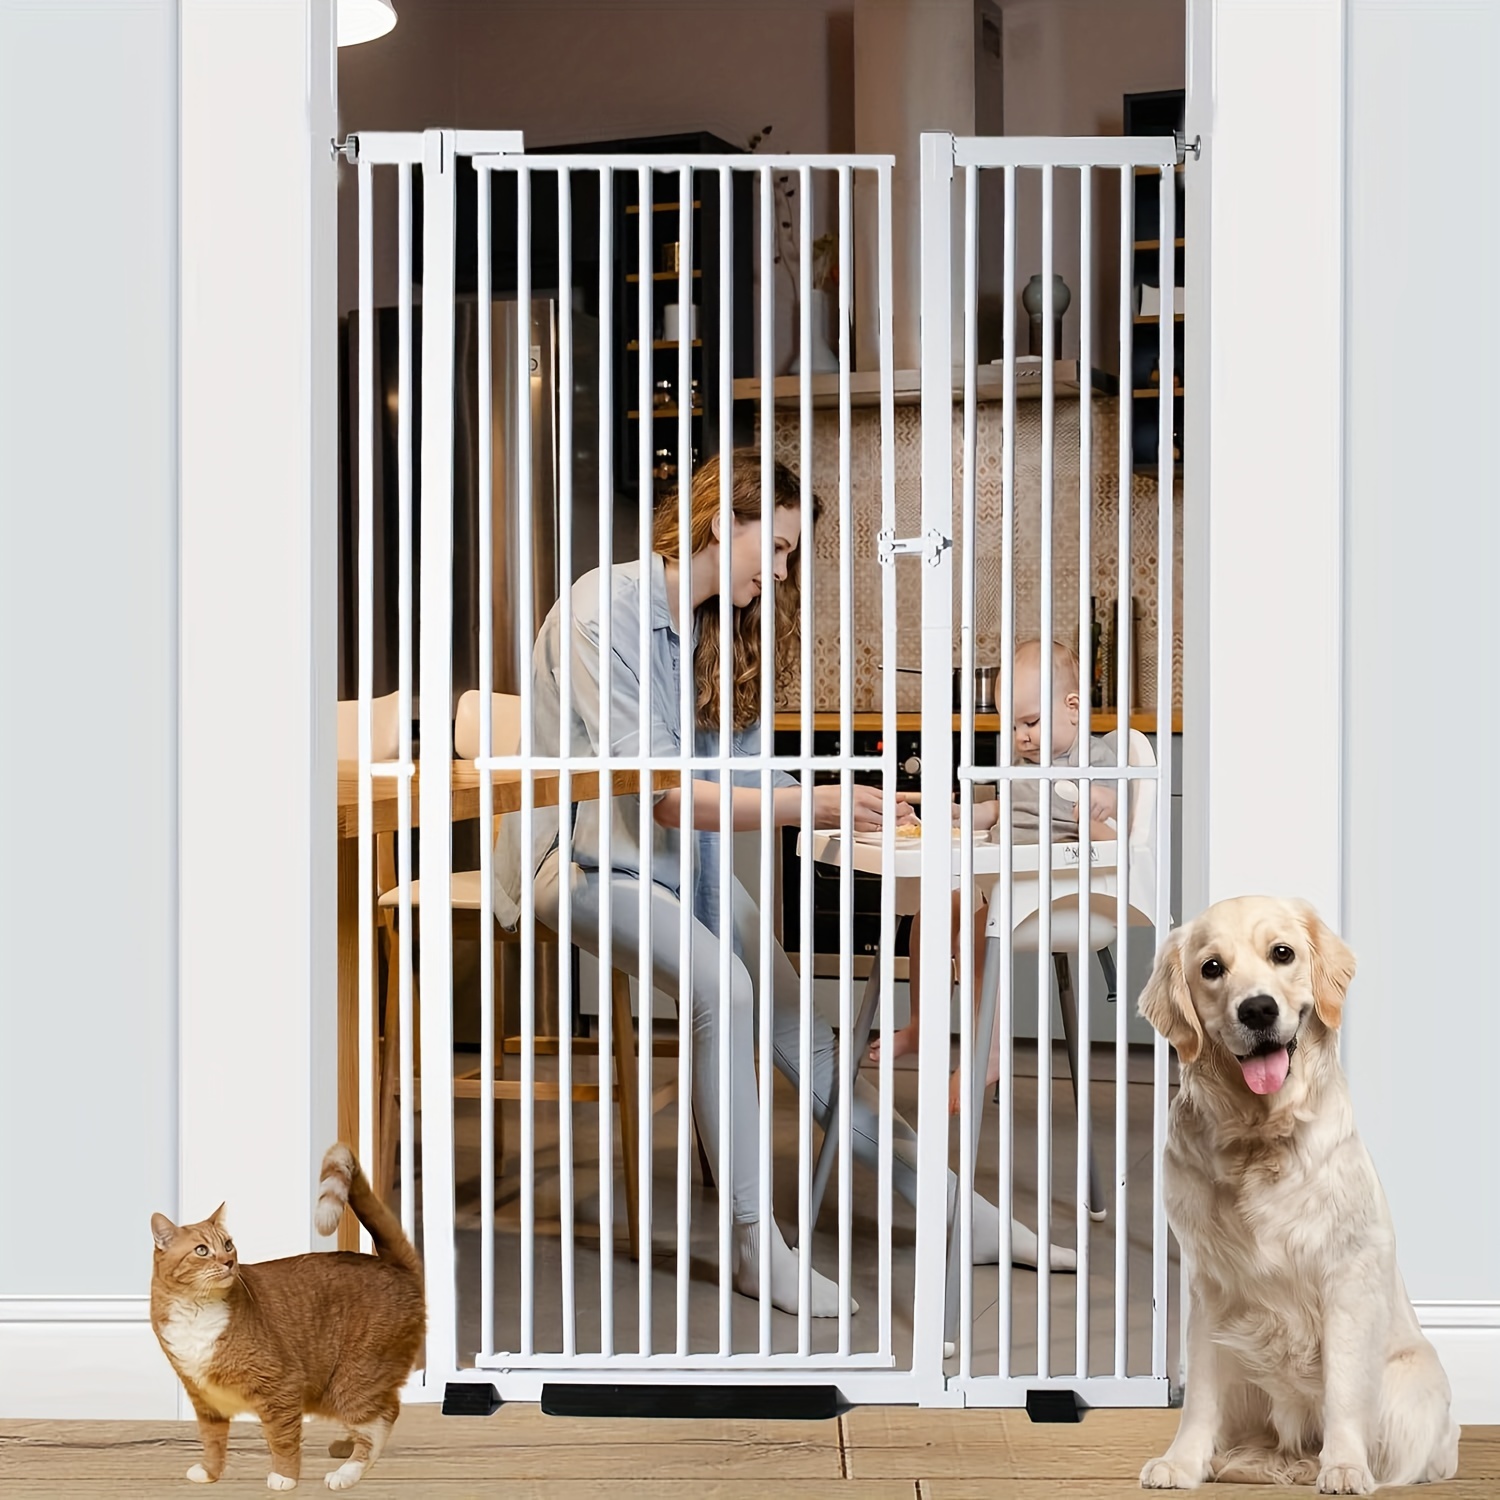 

71 Inch Extra Tall Pet Gate Baby Gate, 29.13"-45.62" Extra Wide Pressure Mounted Walk Through Swing Safety Cat Gates For Stairs, Doorways, Kitchen